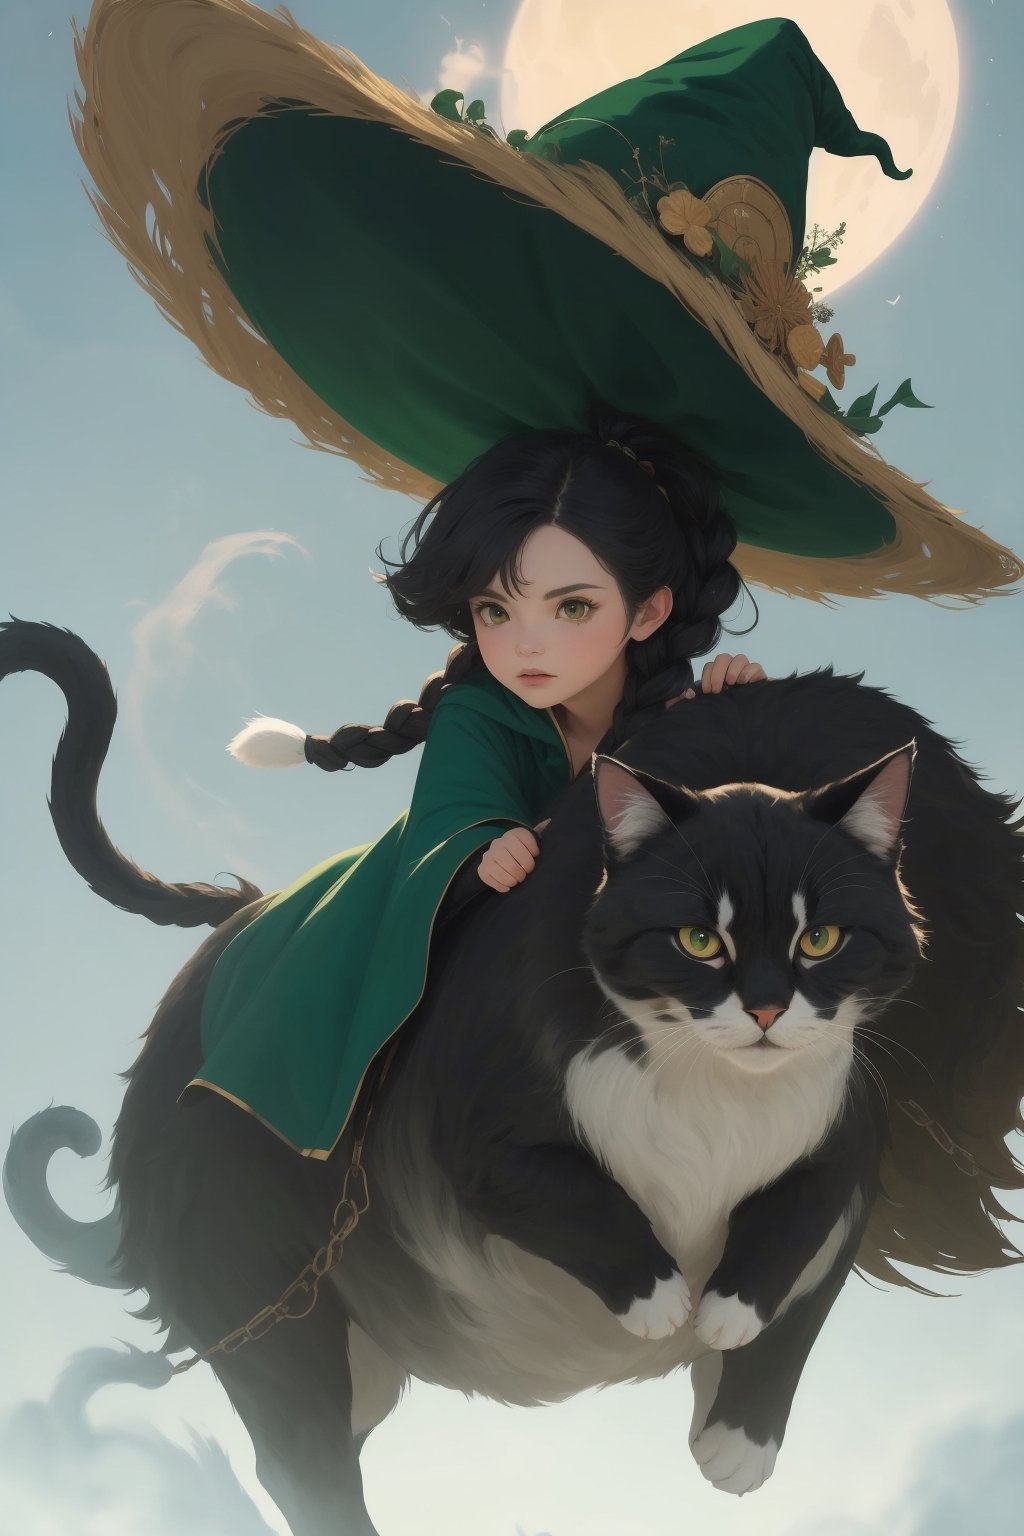 (( Riding a giant fat fluffy calico cat )), shining eyes, twin braid, black hair, parted bangs, little girl, 10 years old, simple green witch's big hat and green robe, ,chibi,genshin chibi emote,best quality,fantasy,art,